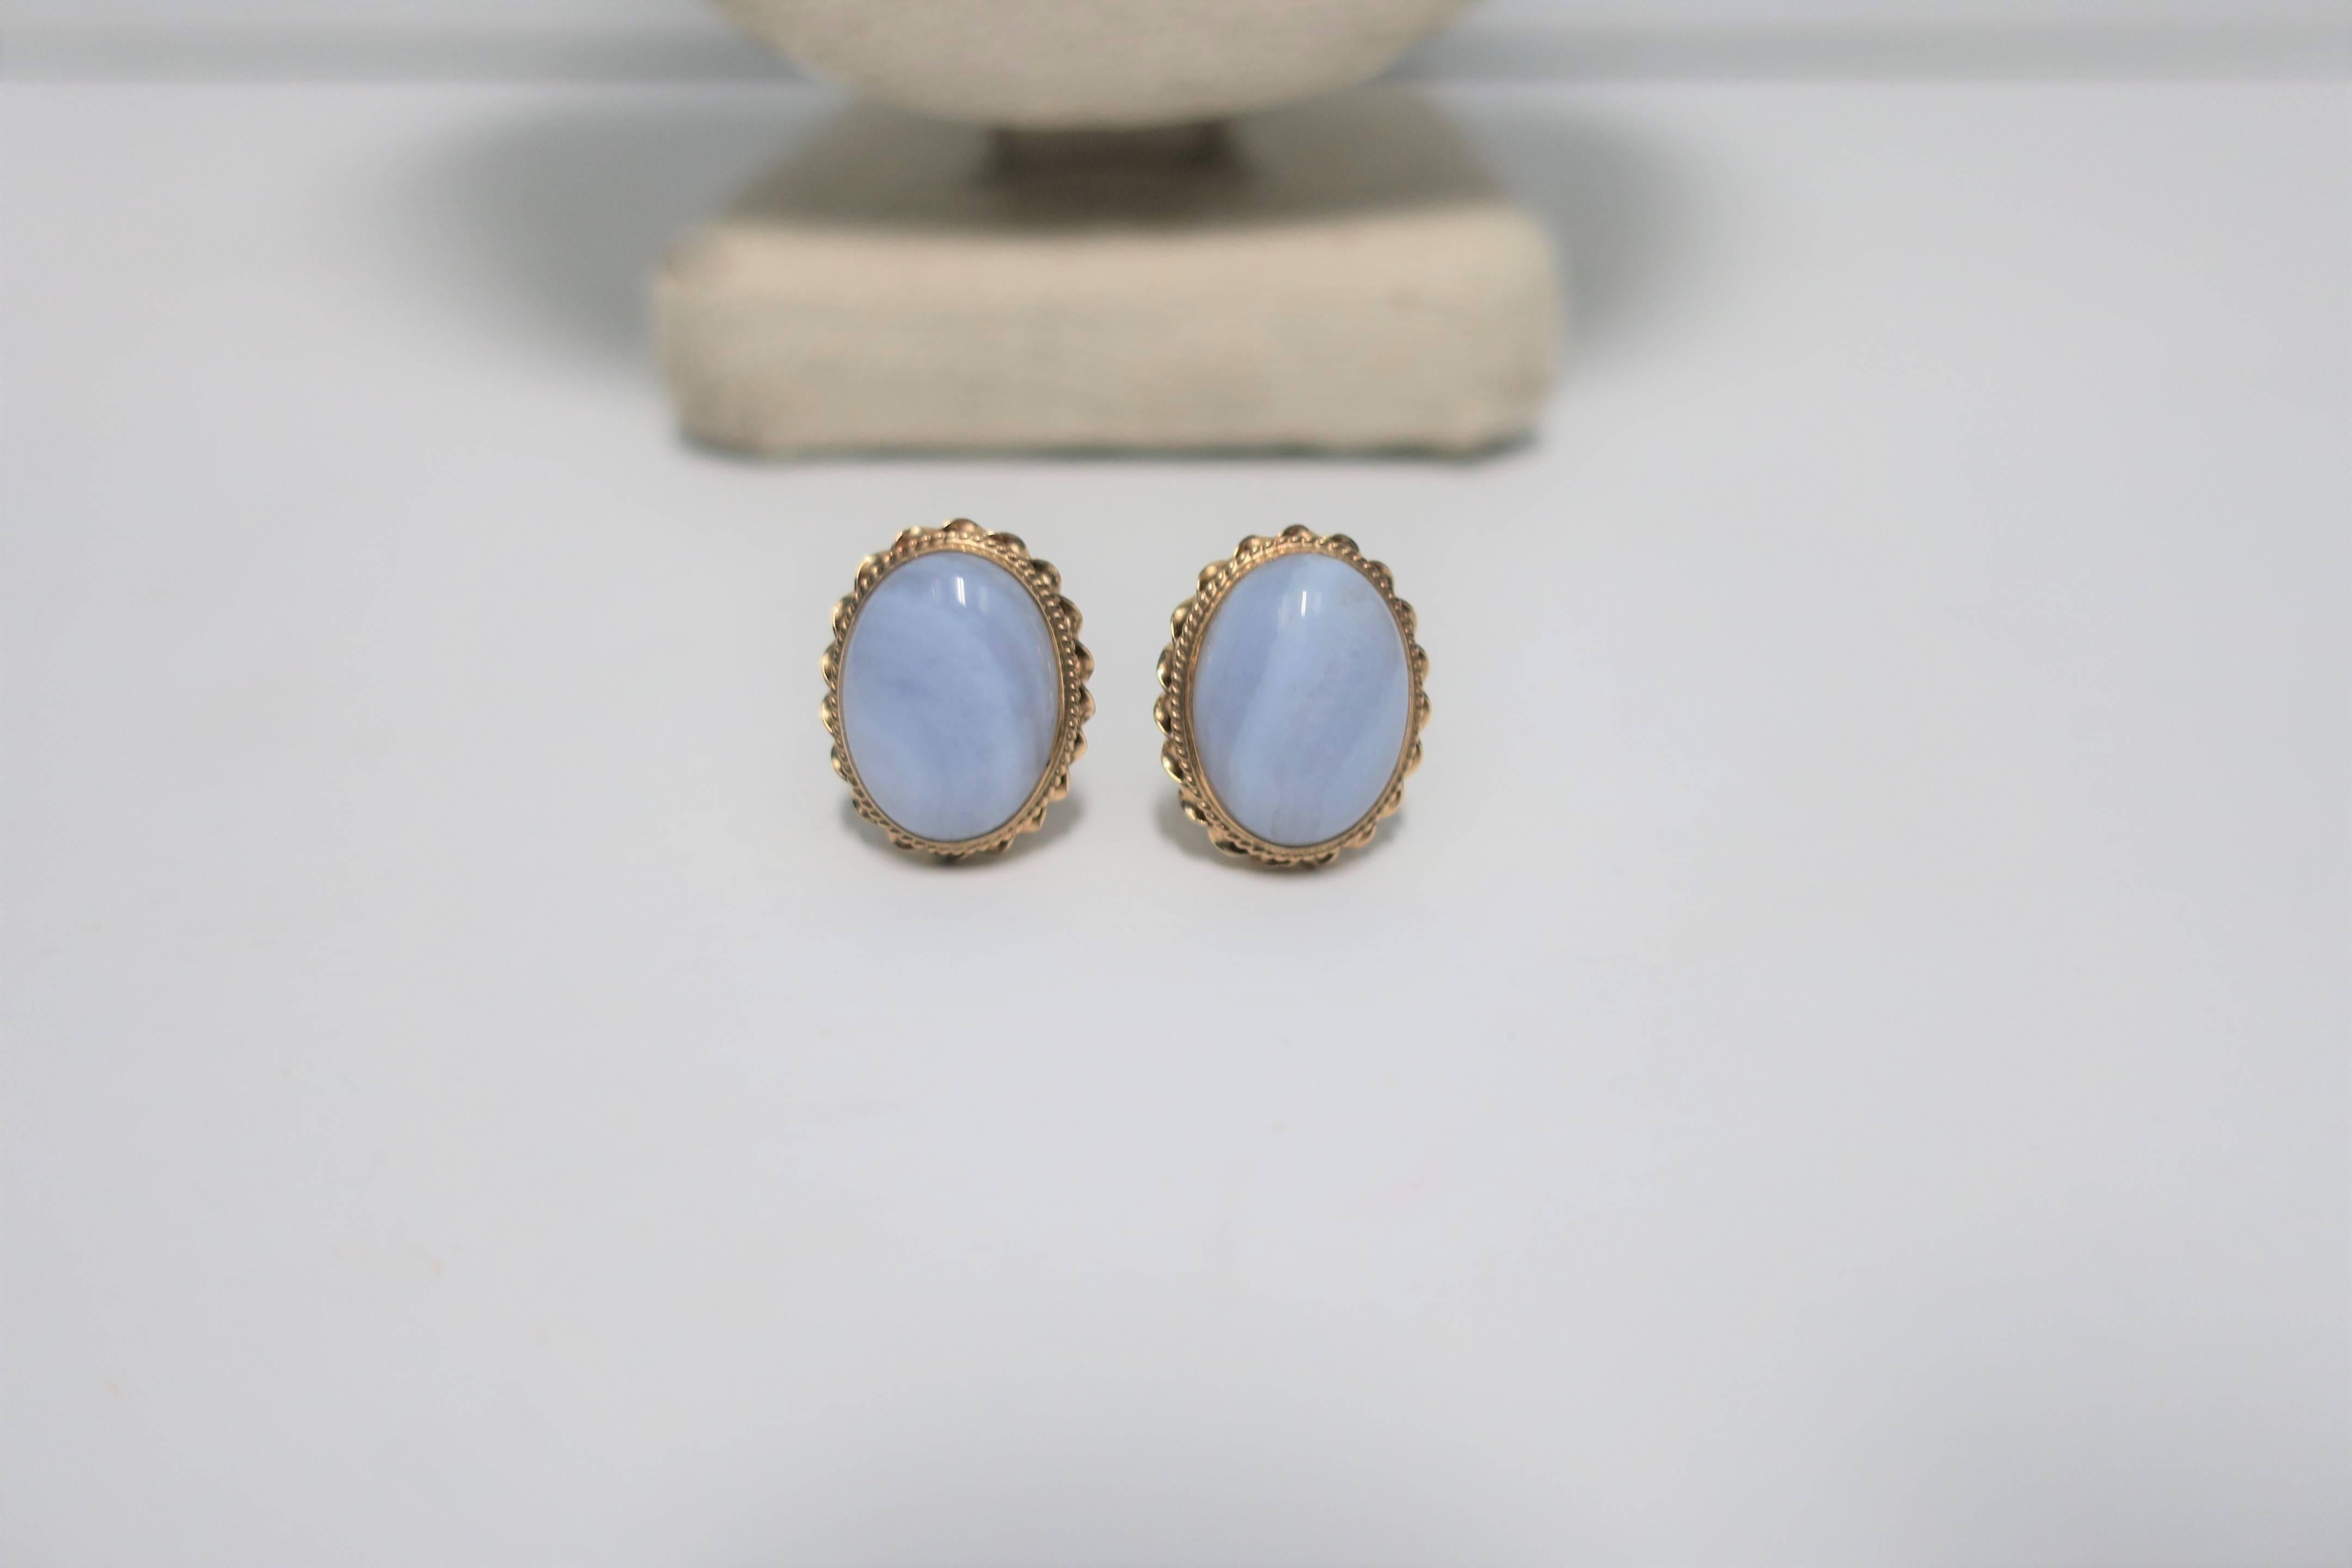 A pair of vintage oval chalcedony quartz and 14-karat yellow gold earrings, circa mid-20th century. Each earring has maker's mark 